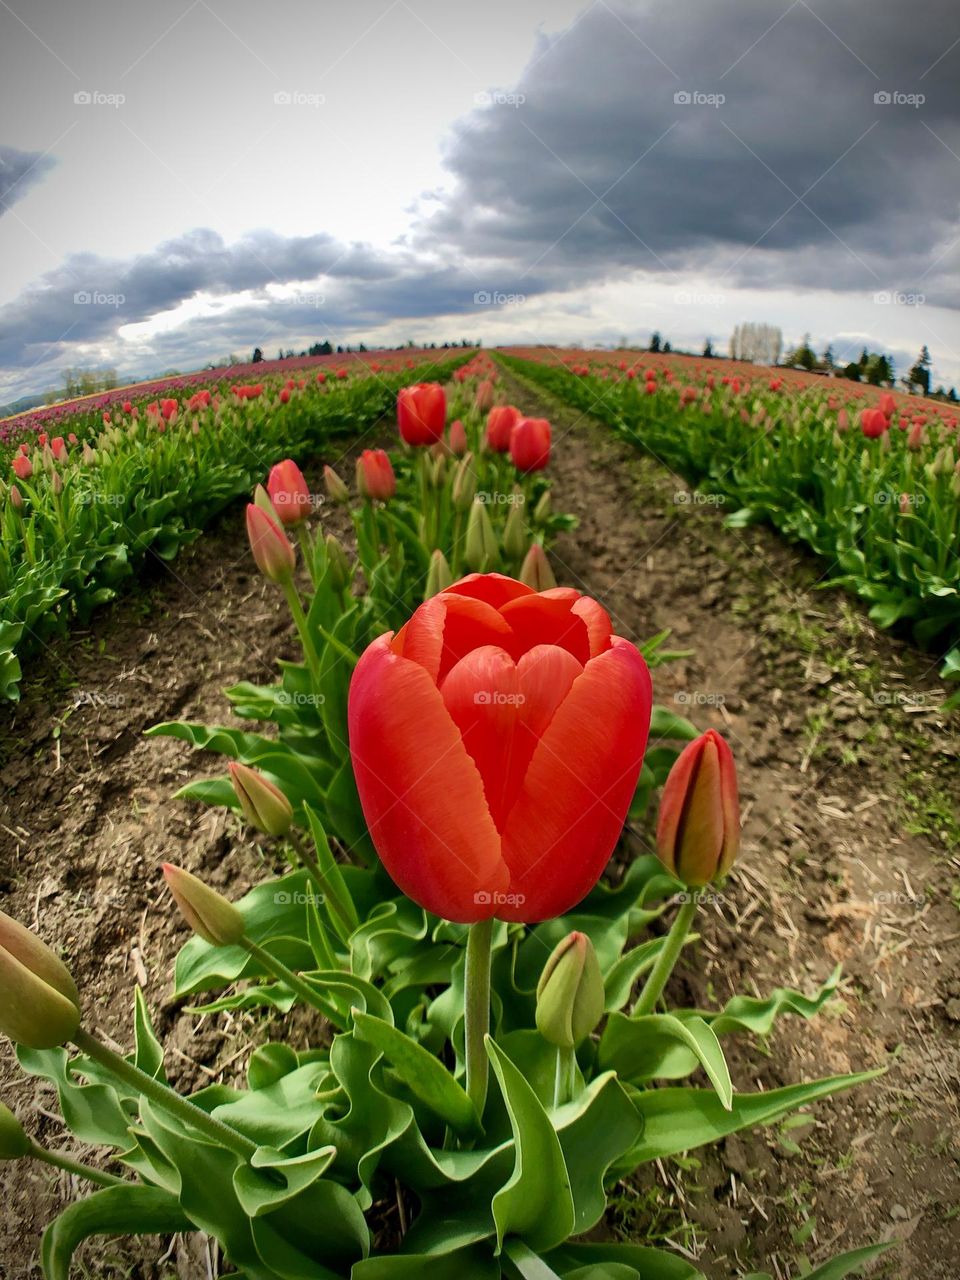 Foap Mission “Spring vs Winter! Springtime Tulip Fields Of Washington State’s Skagit Valley In The Pacific Northwest !